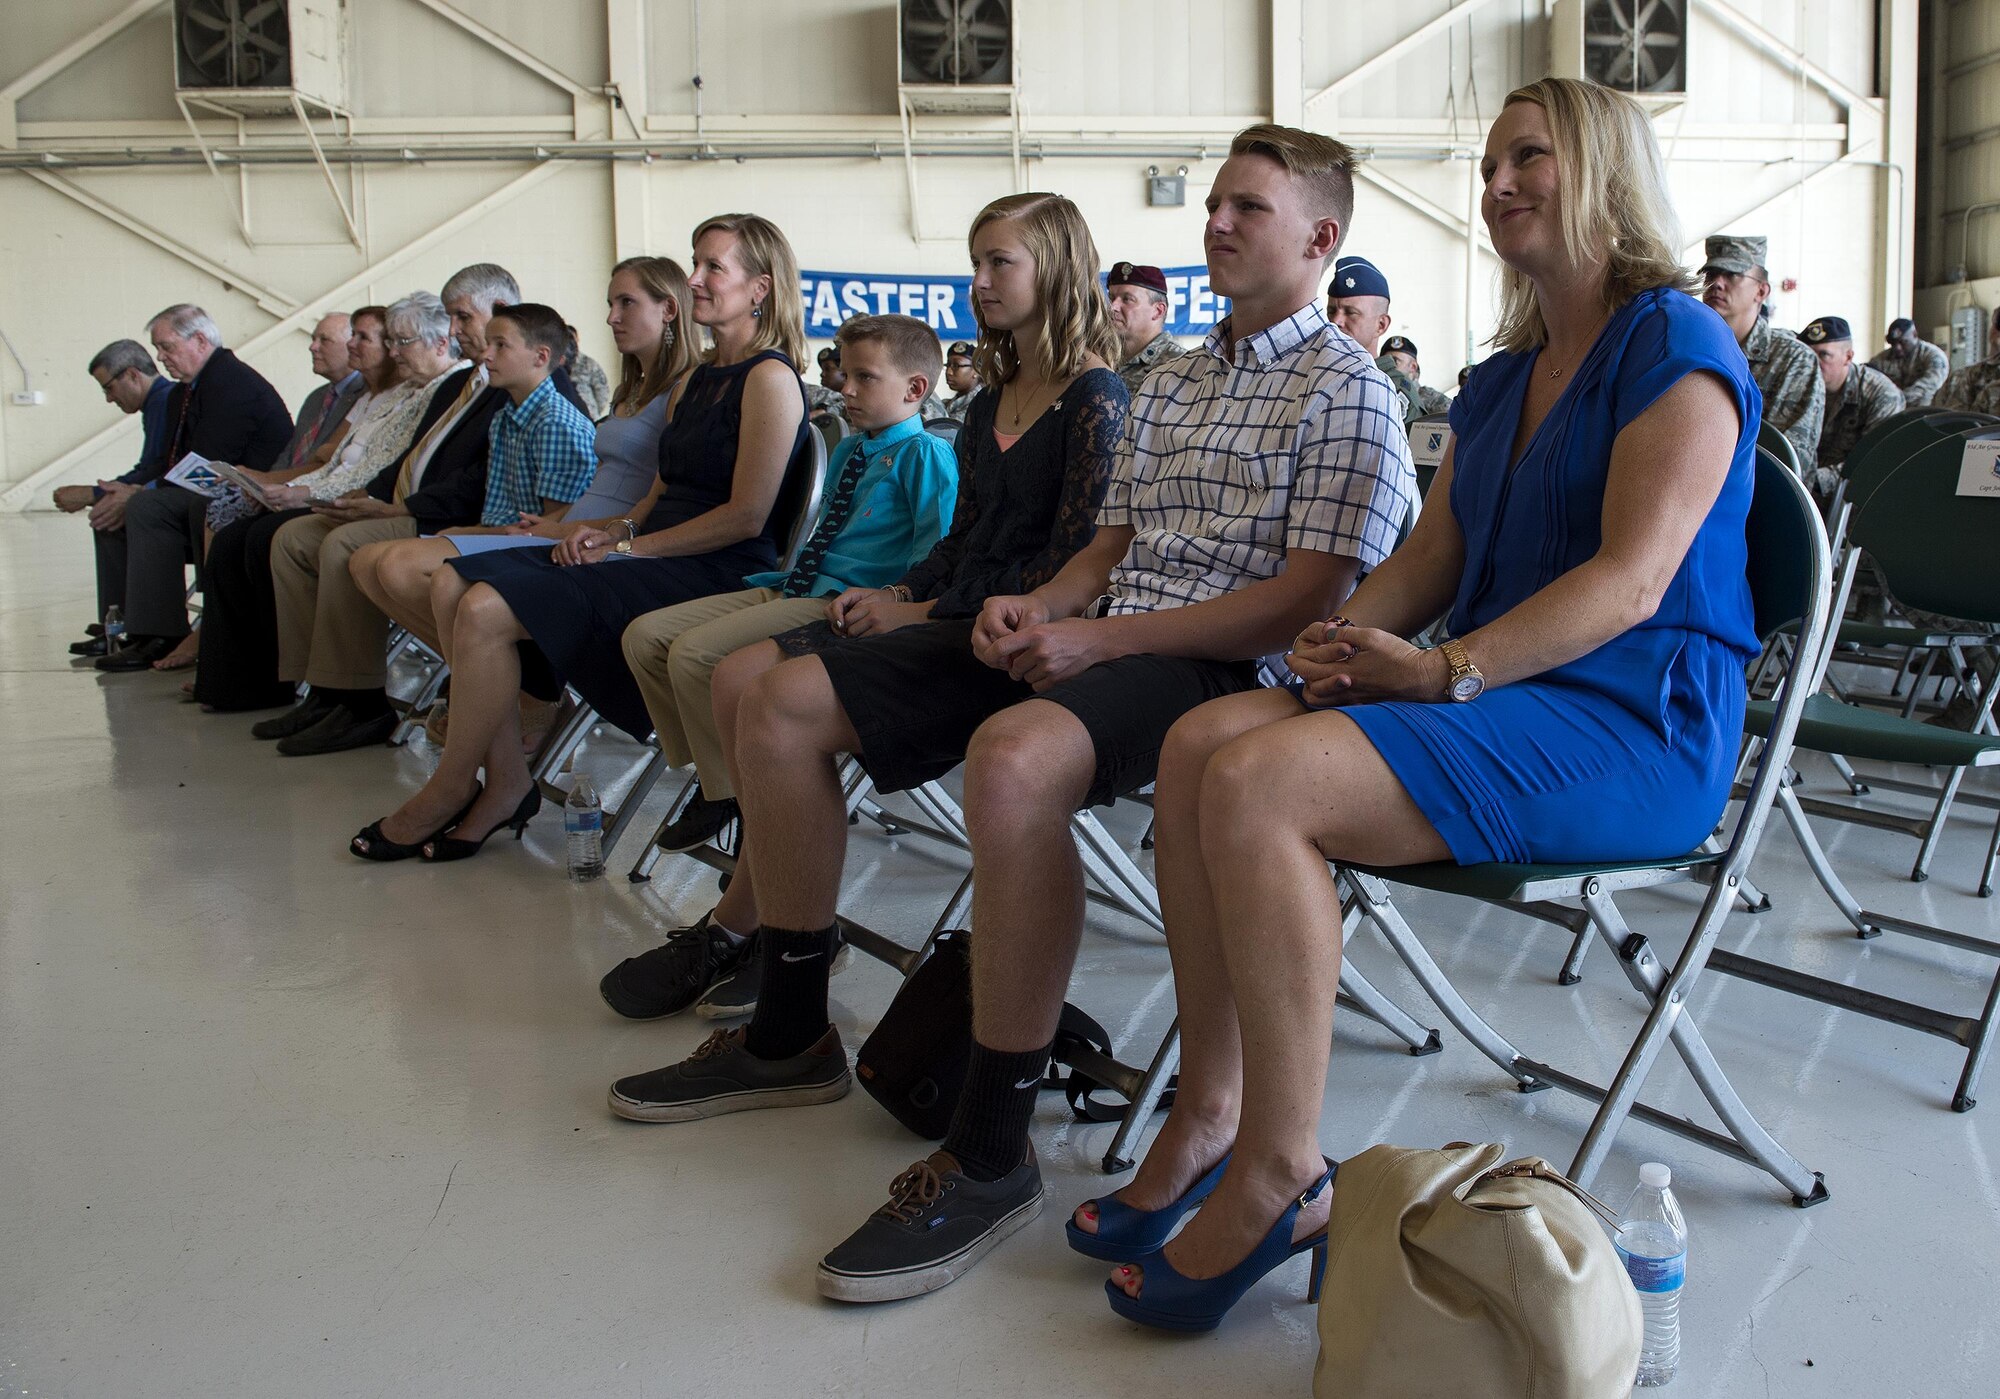 Family and friends listen to remarks during the 93d Air Ground Operations Wing change of command ceremony, June 28, 2016, at Moody Air Force Base, Ga. Upon activation in 2008, the 93d AGOW became the only wing to provide highly trained ground combat forces capable of integrating air and space power into the ground scheme of fire and maneuver. (U.S. Air Force photo by Airman 1st Class Janiqua P. Robinson/Released)